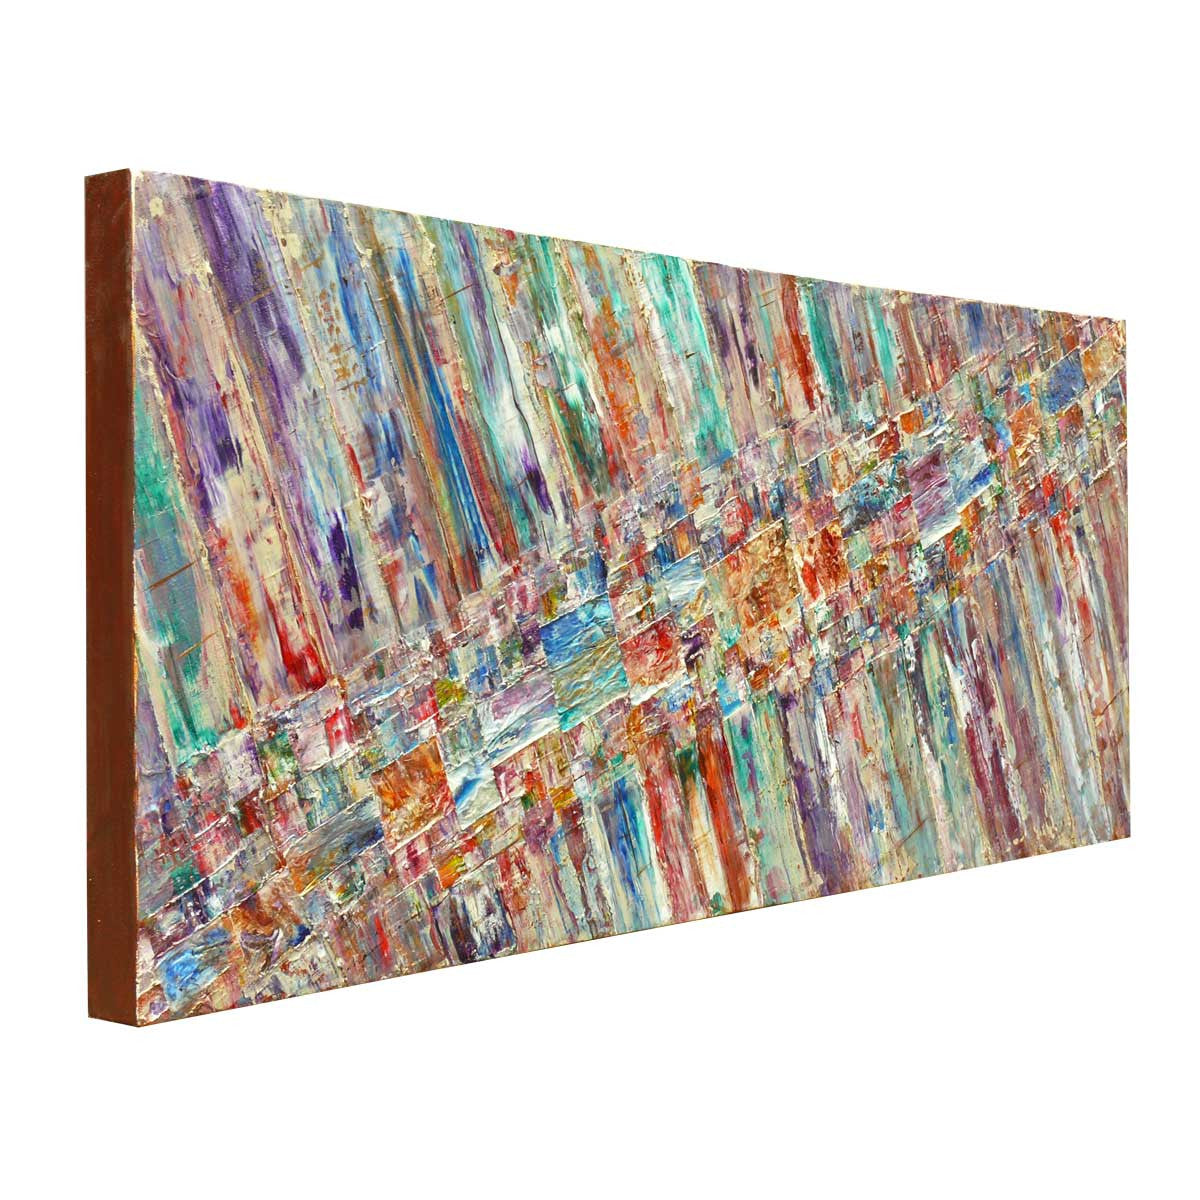 'Summer Promenade' abstract painting on canvas